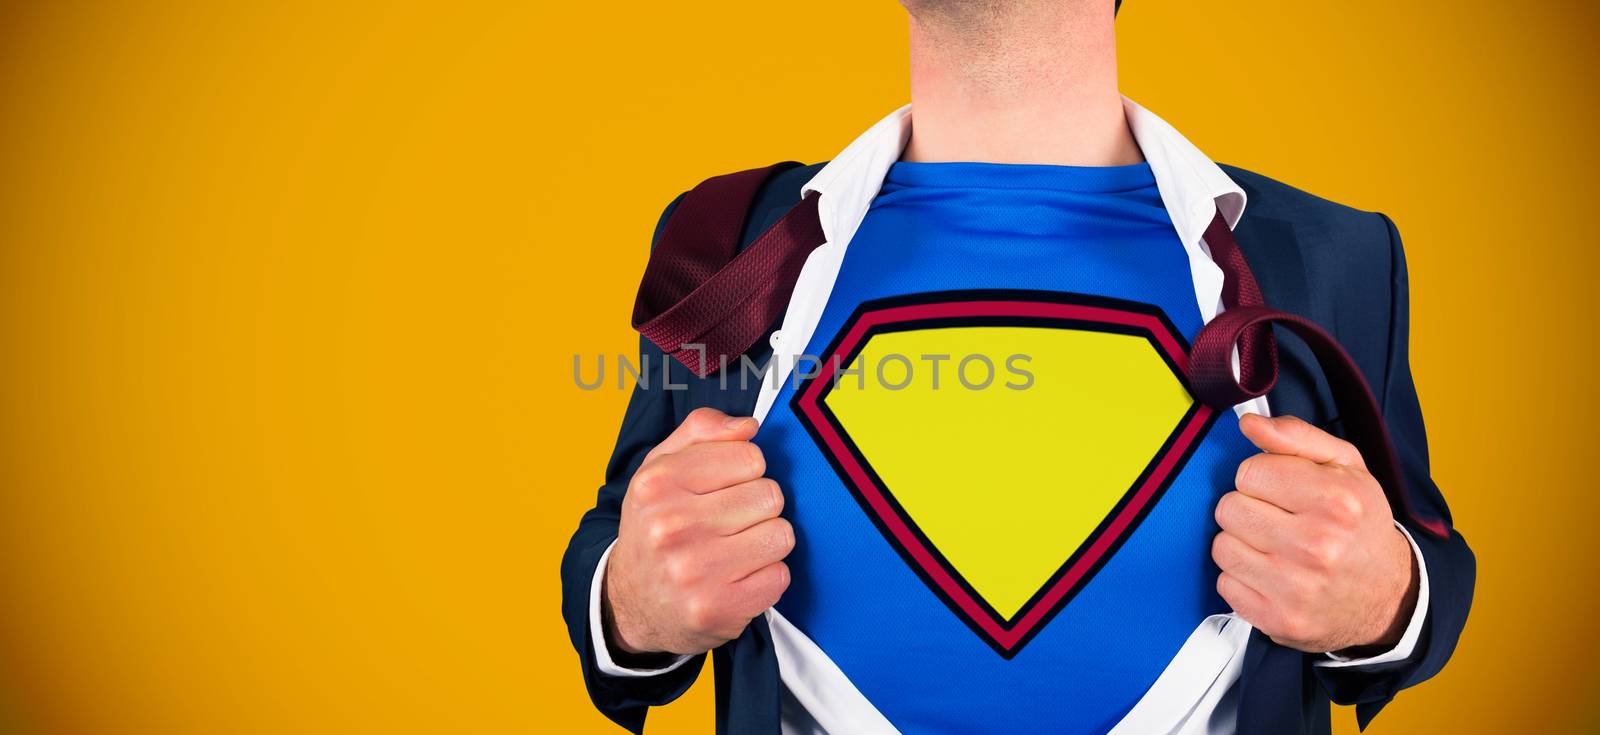 Businessman opening shirt in superhero style against yellow background with vignette